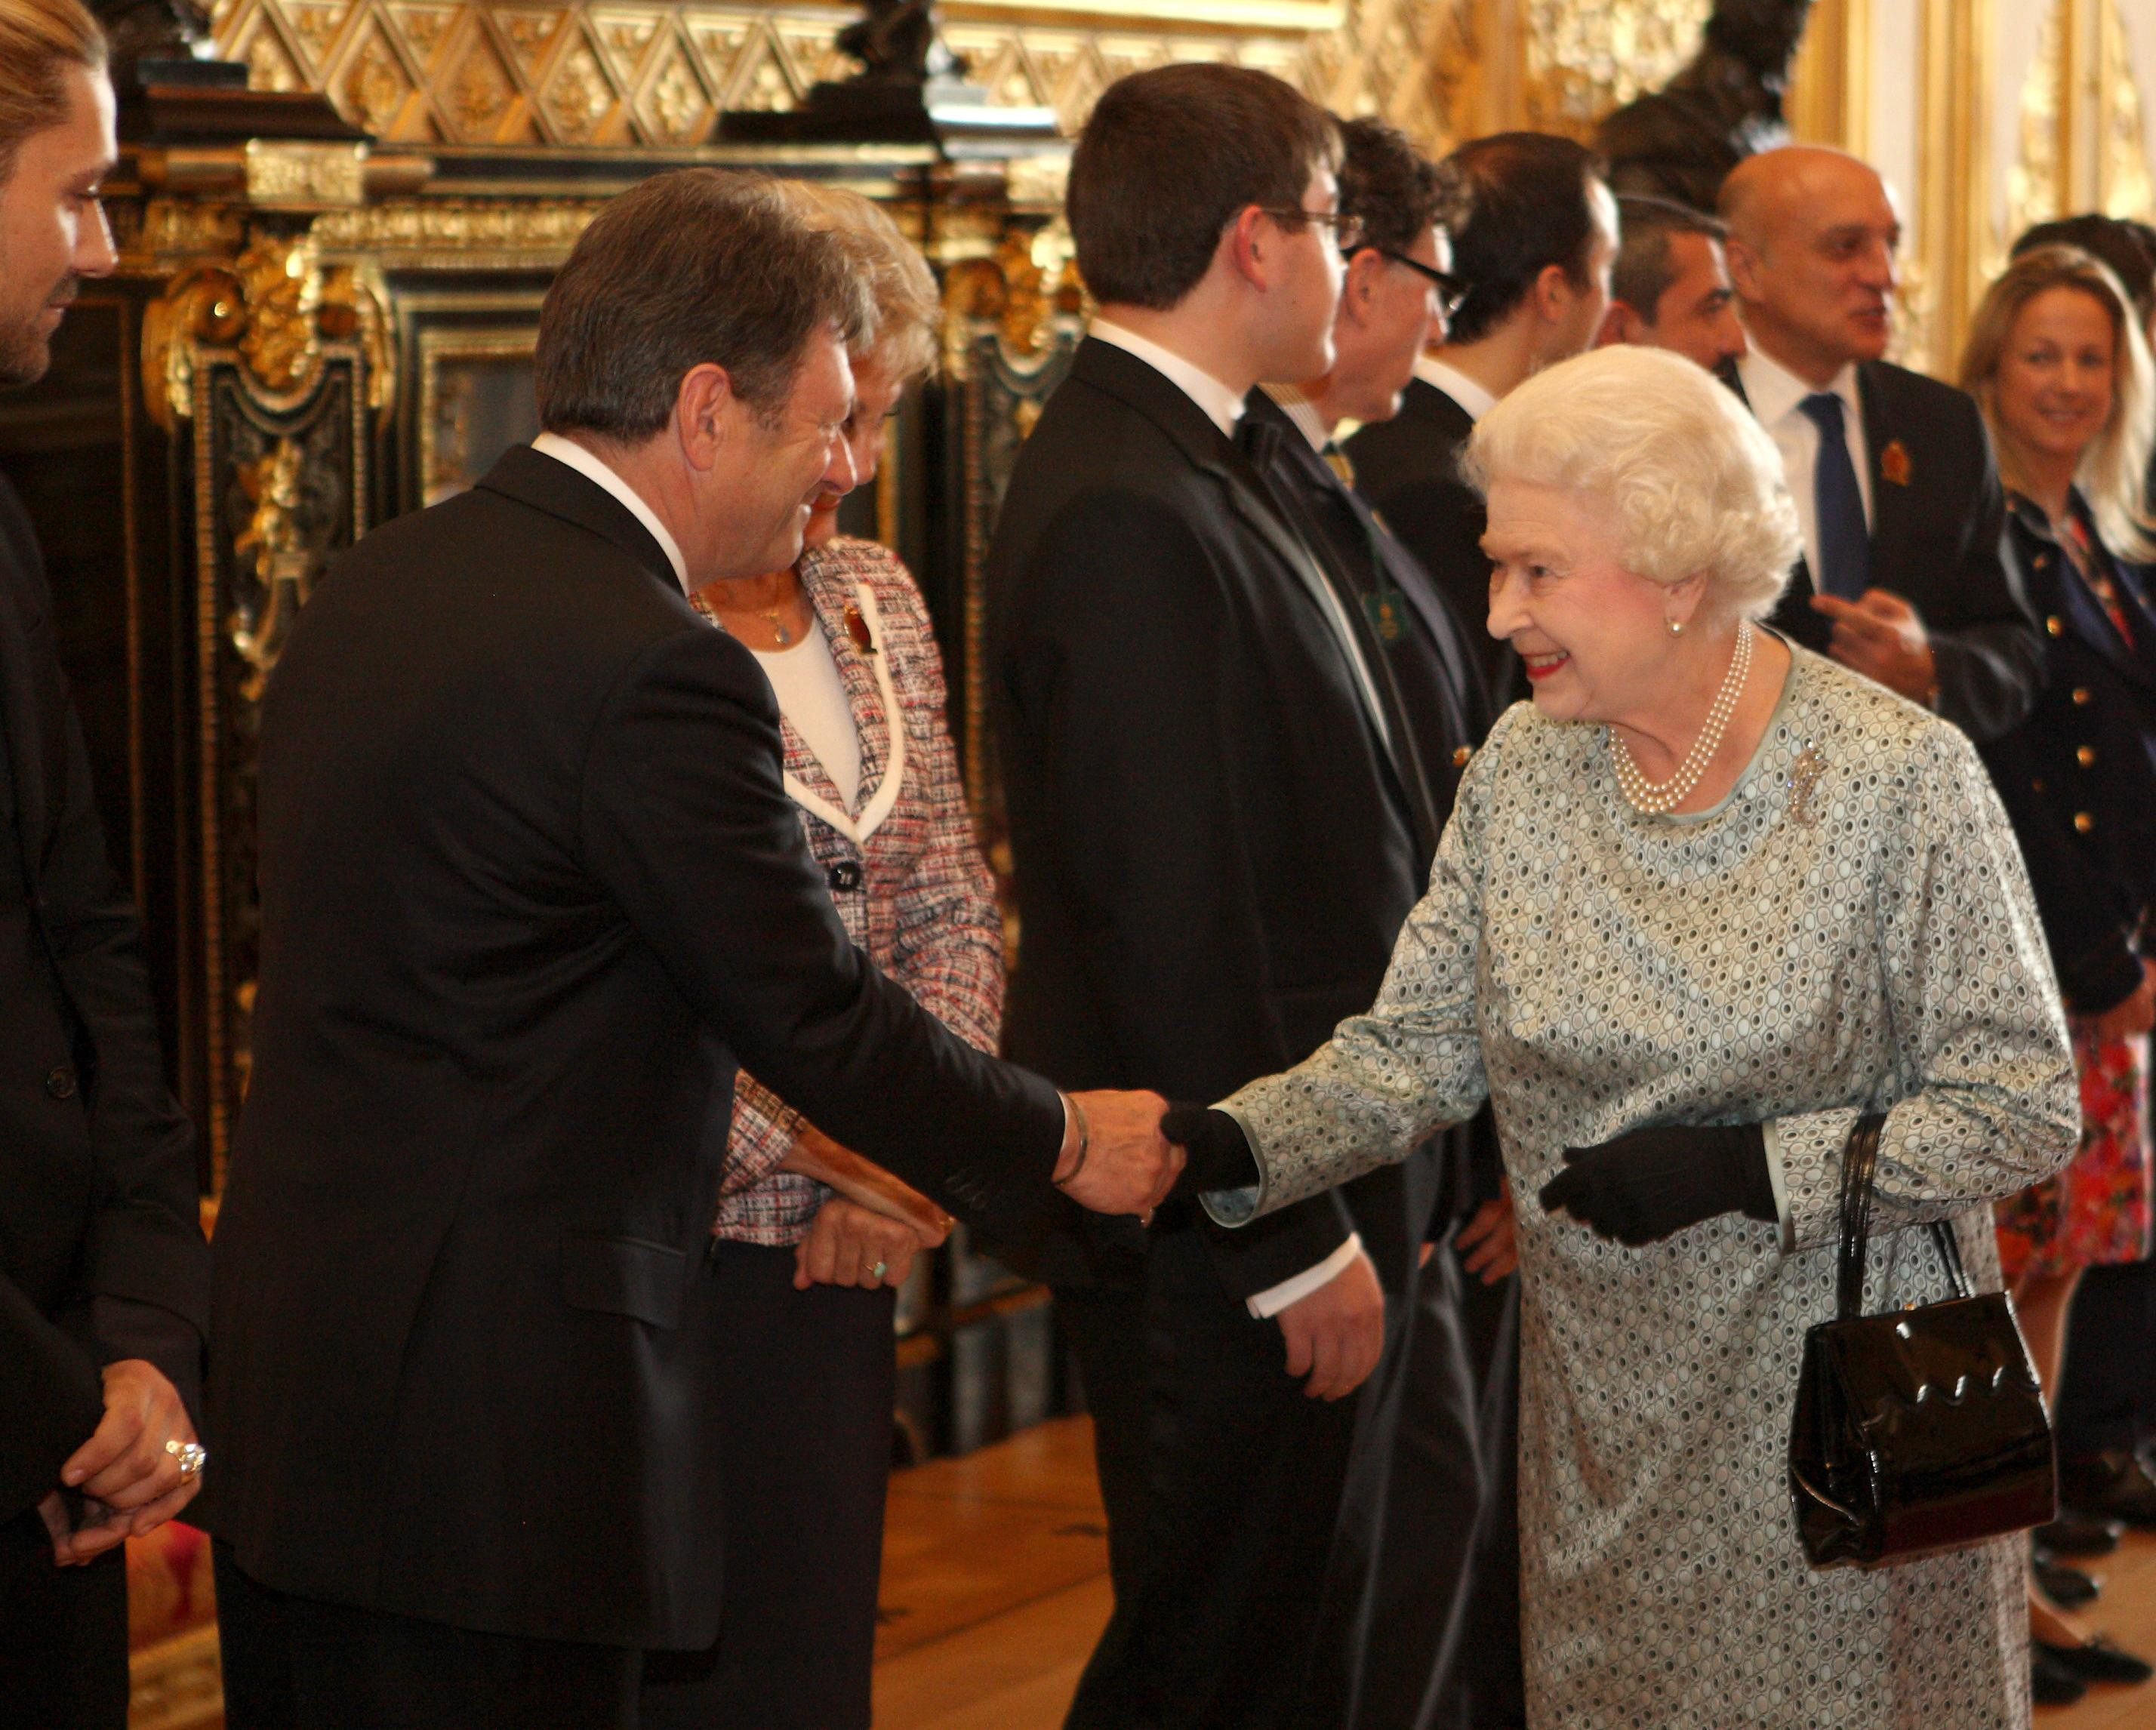 Alan Titchmarsh meeting the Queen in 2012 (Steve Parsons/PA)